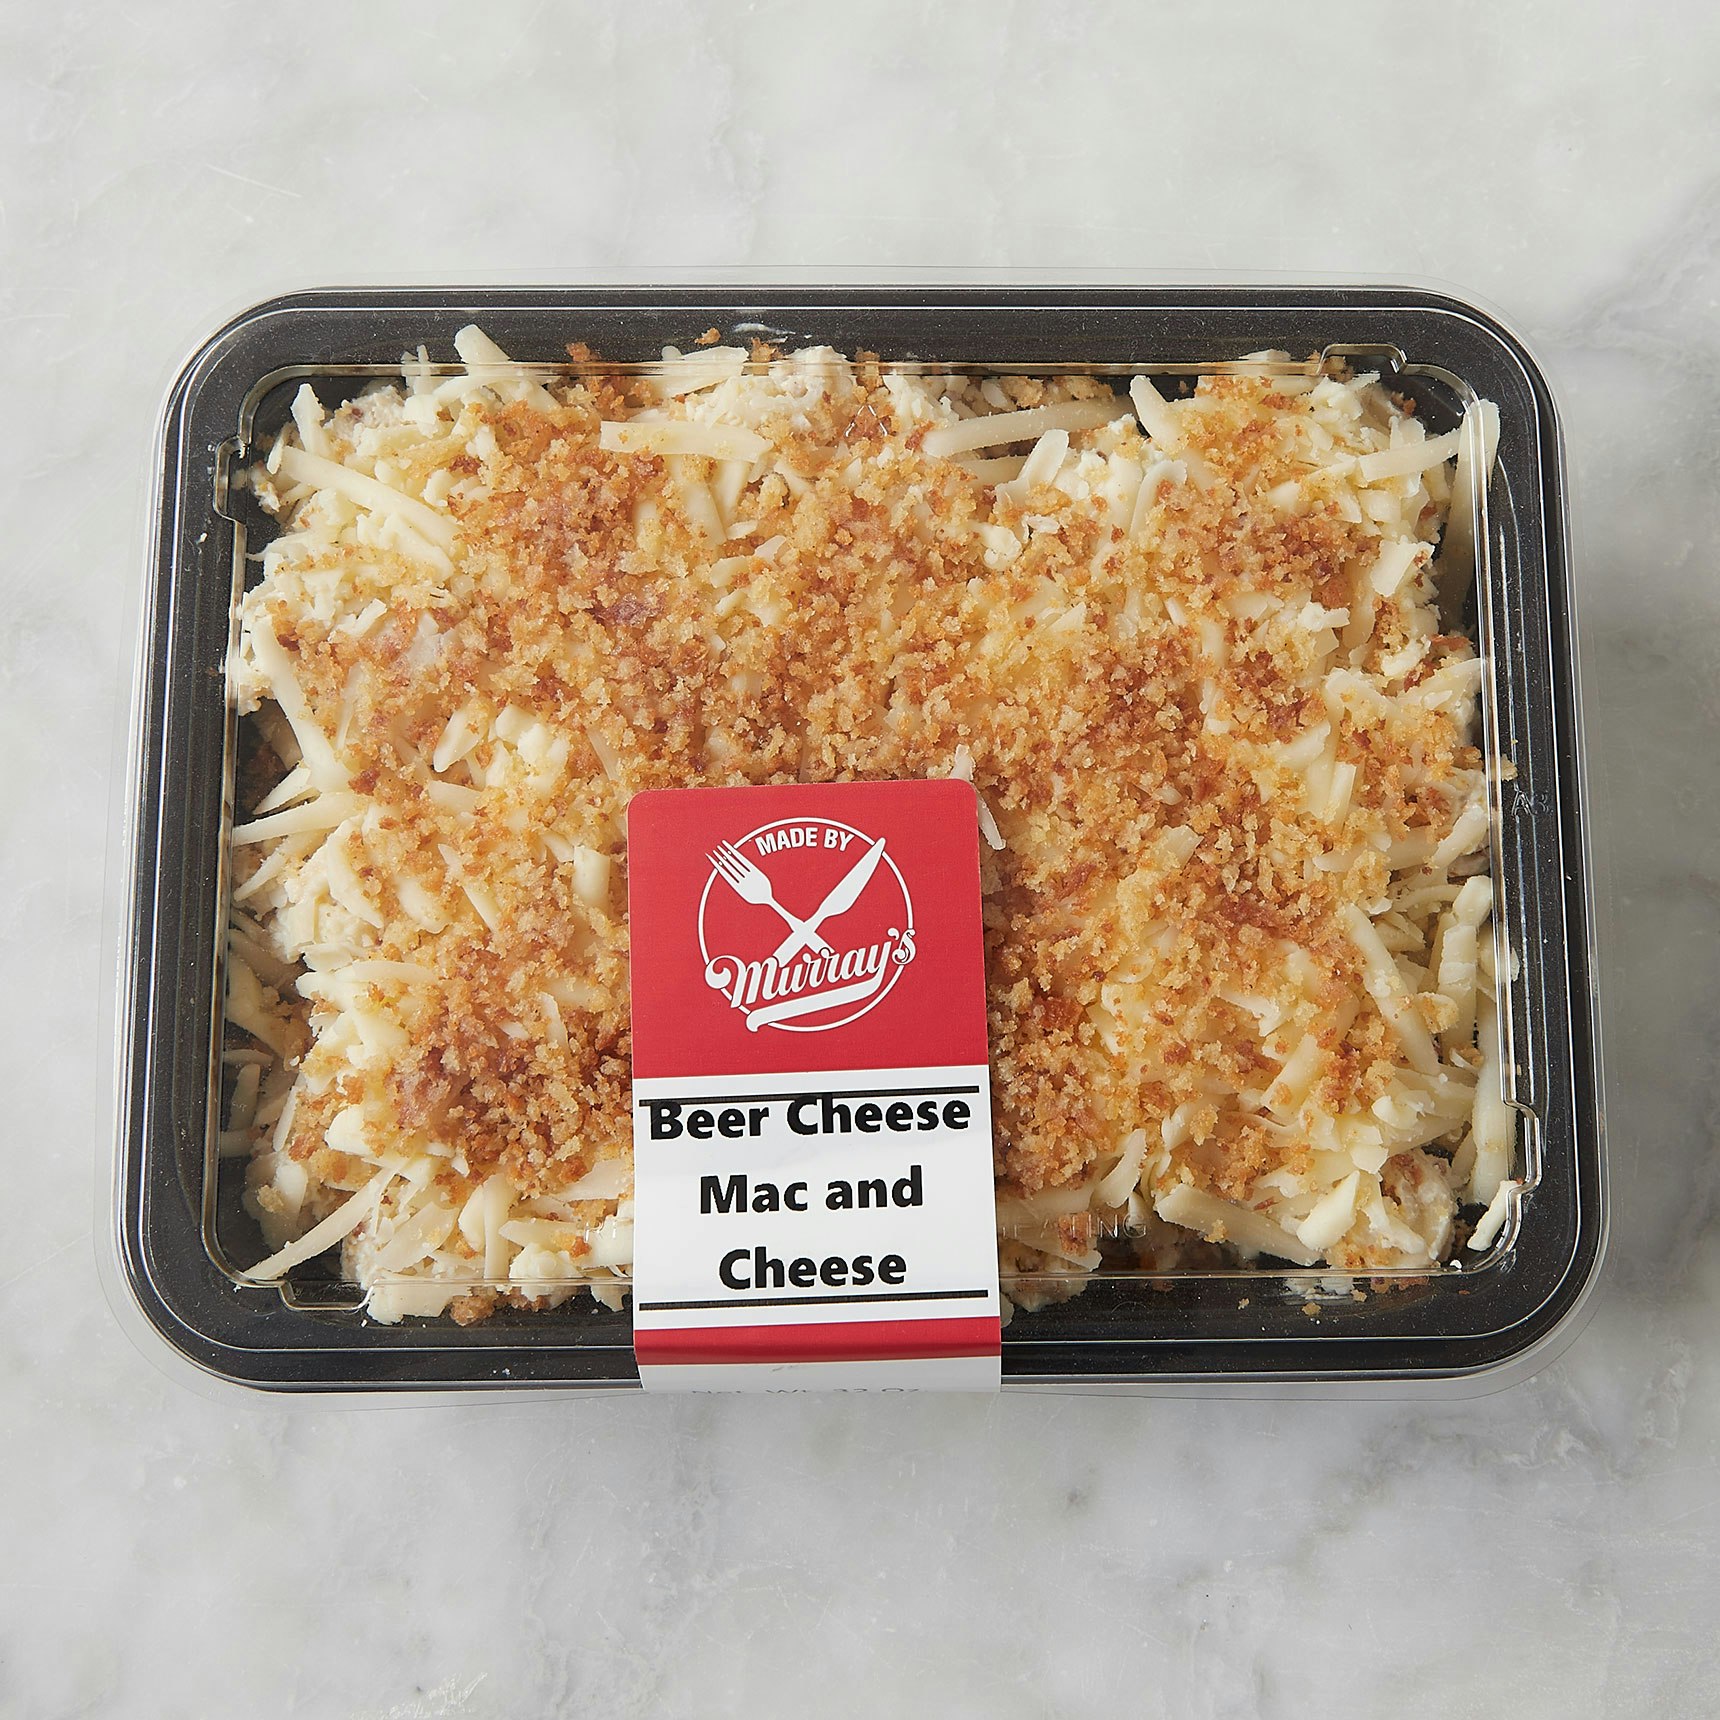 Murray's Beer Cheese Mac And Cheese